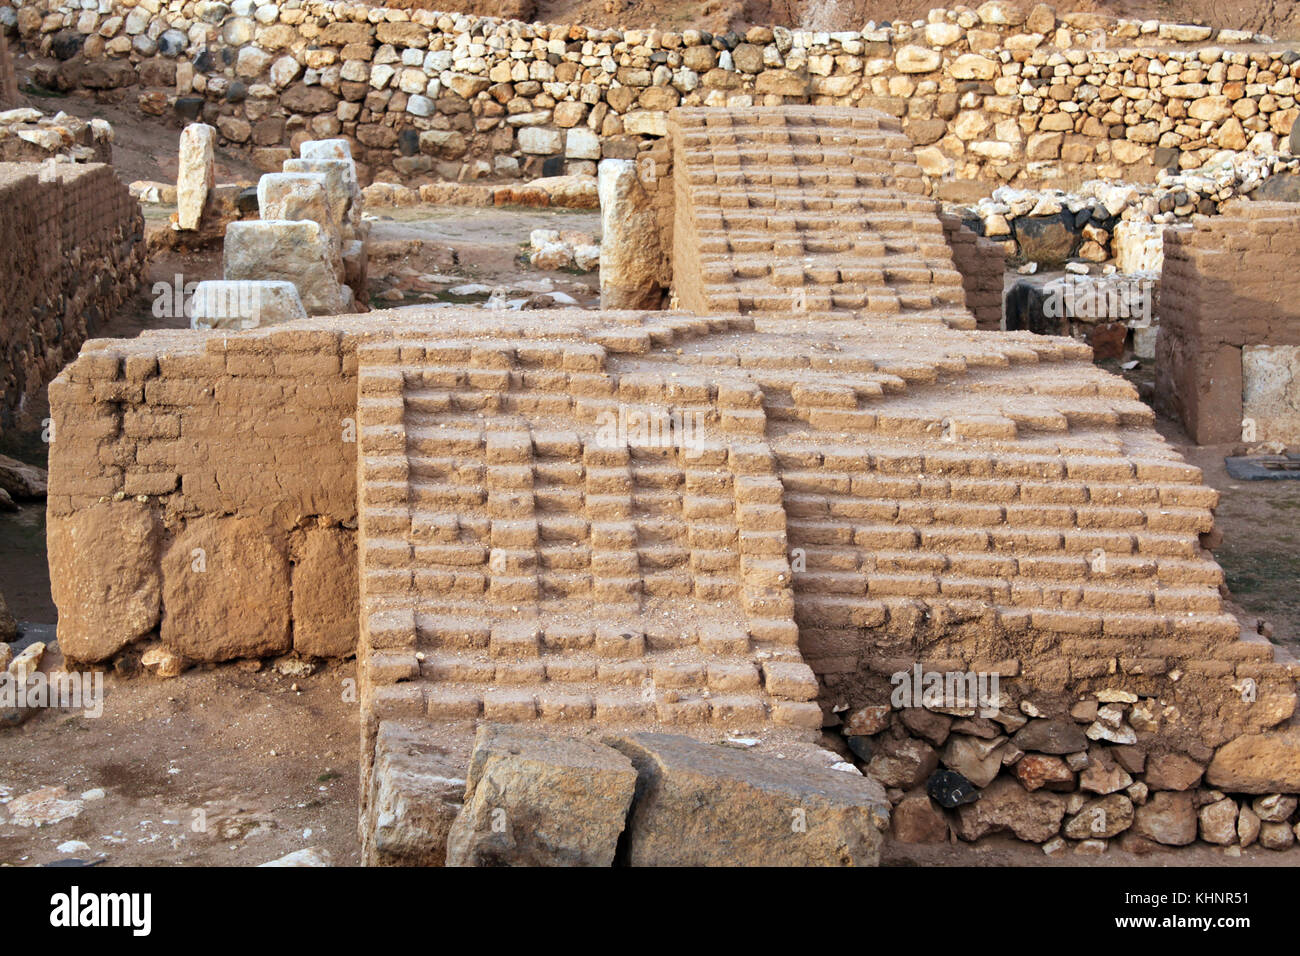 Ruins of ancient houses in Ebla, Syria Stock Photo